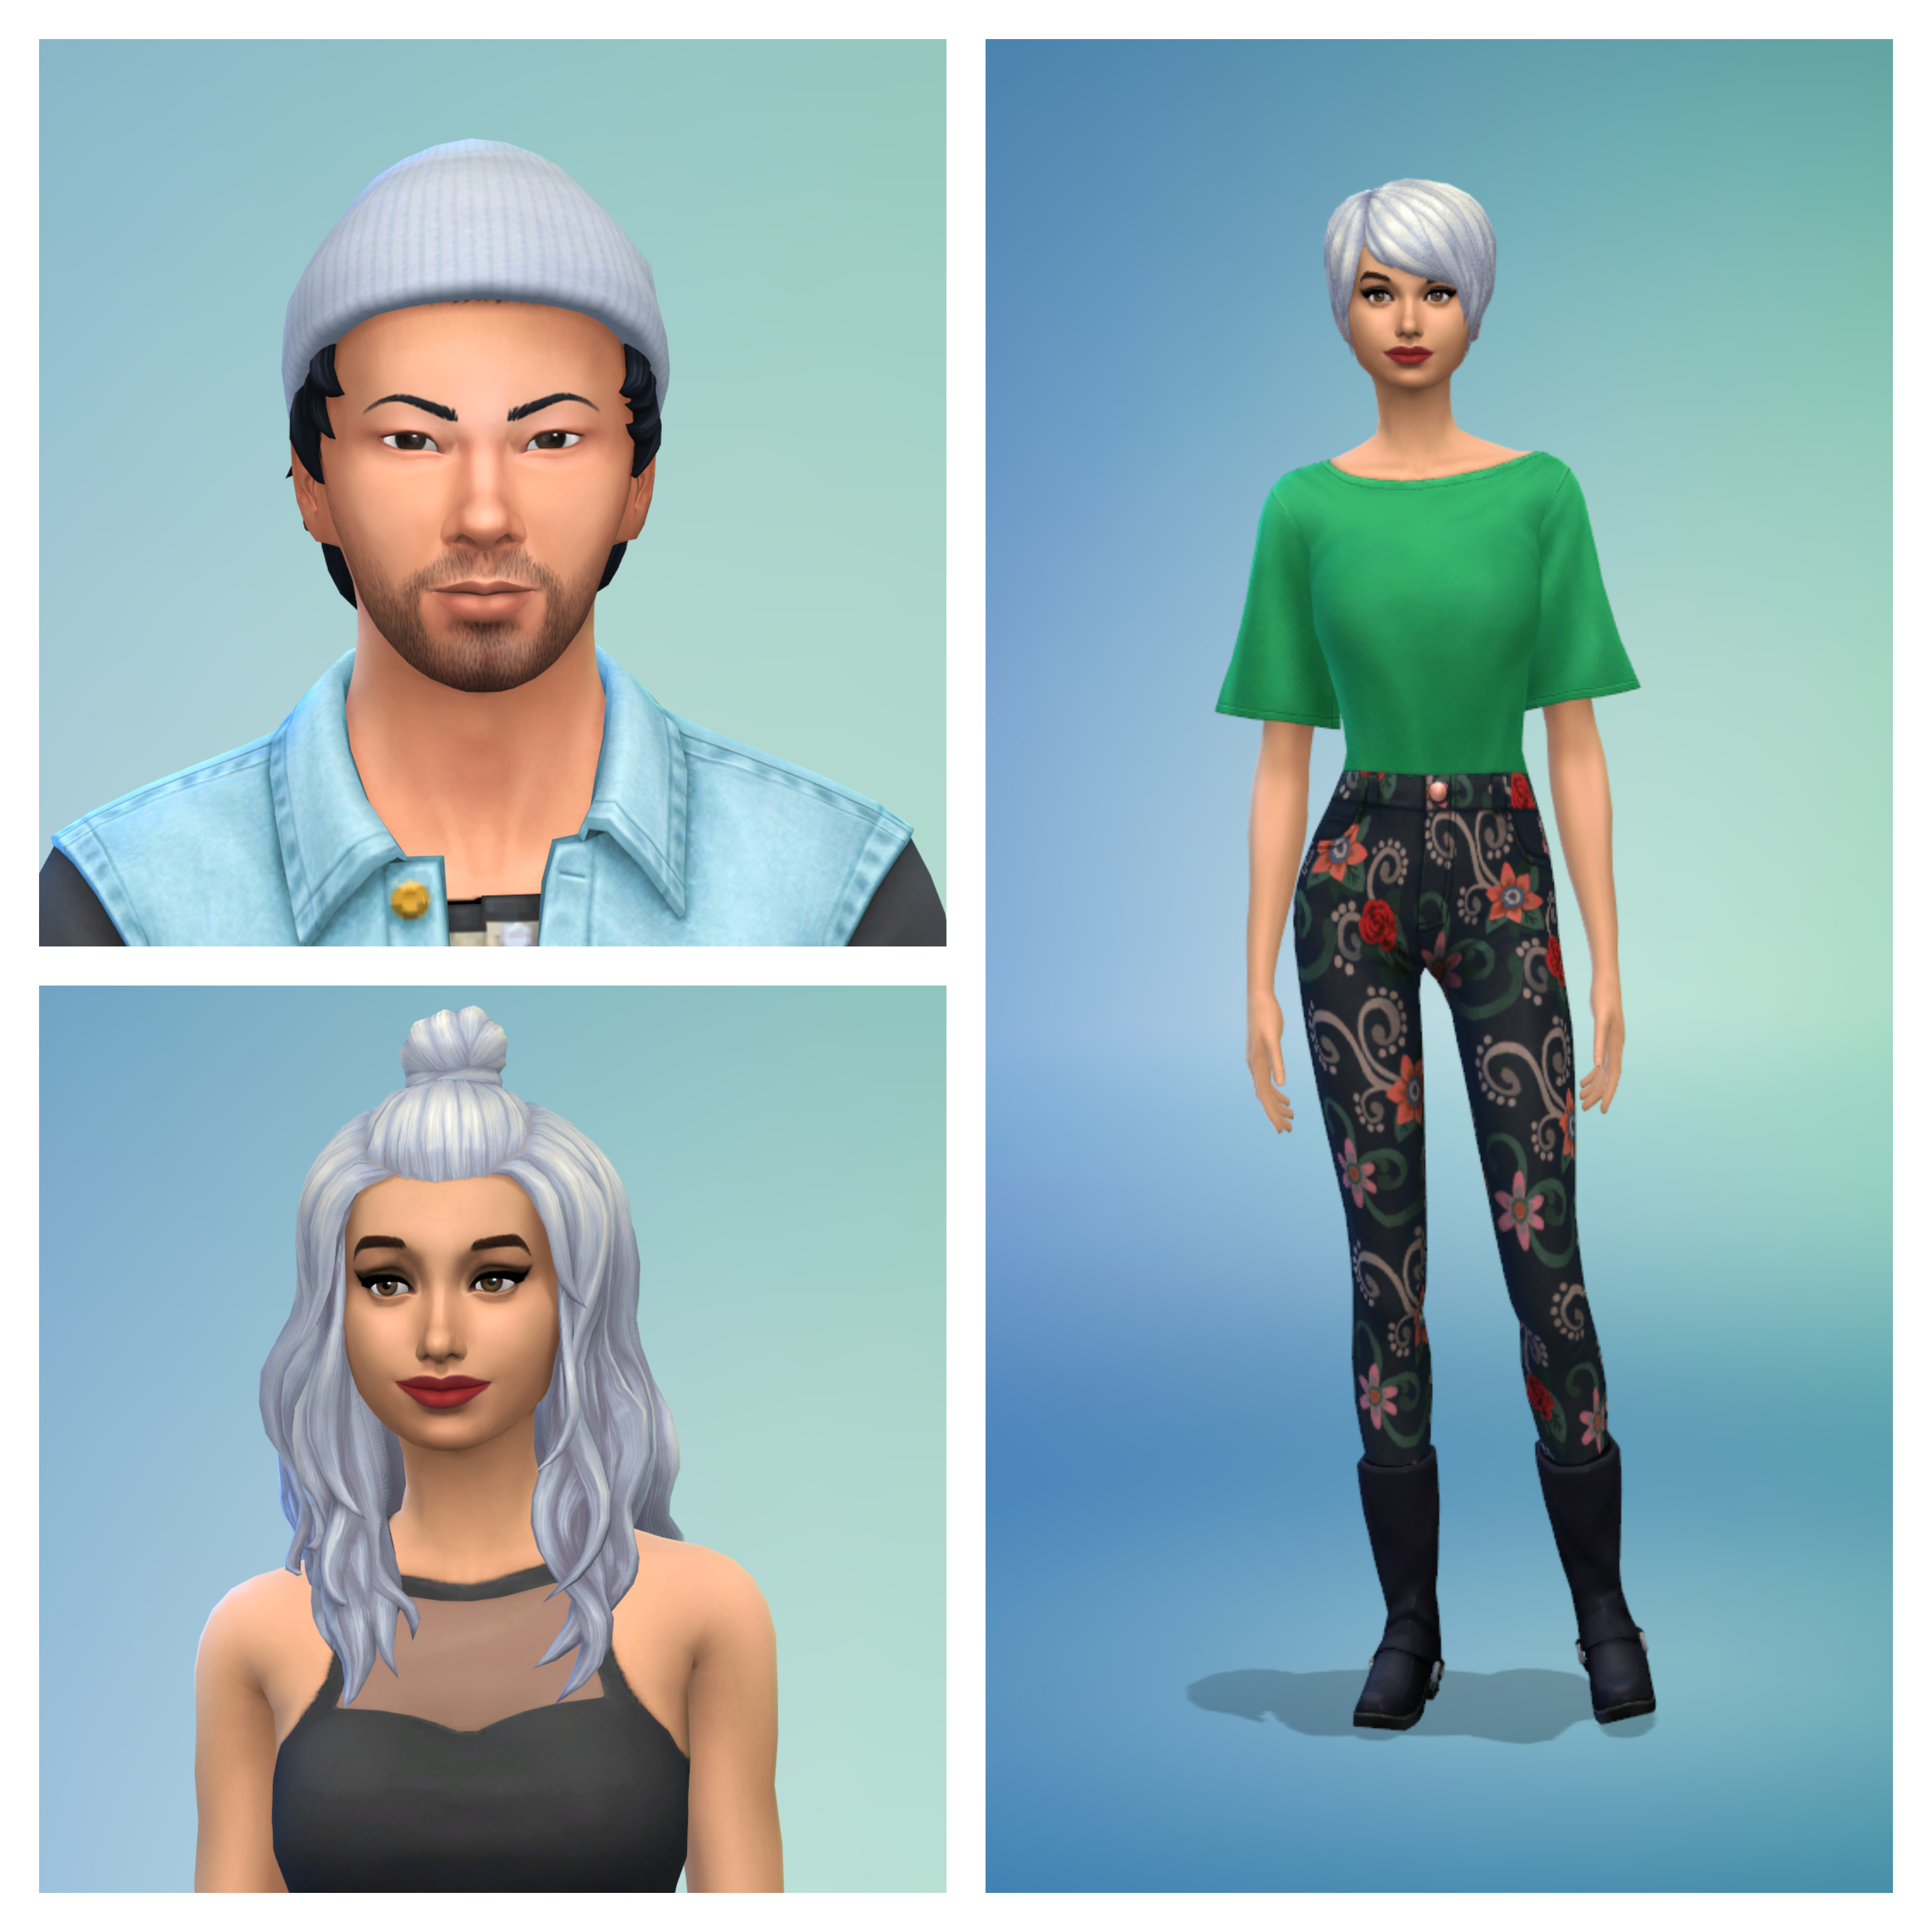 The Sims 4 New And Converted Create A Sim Items Included In The